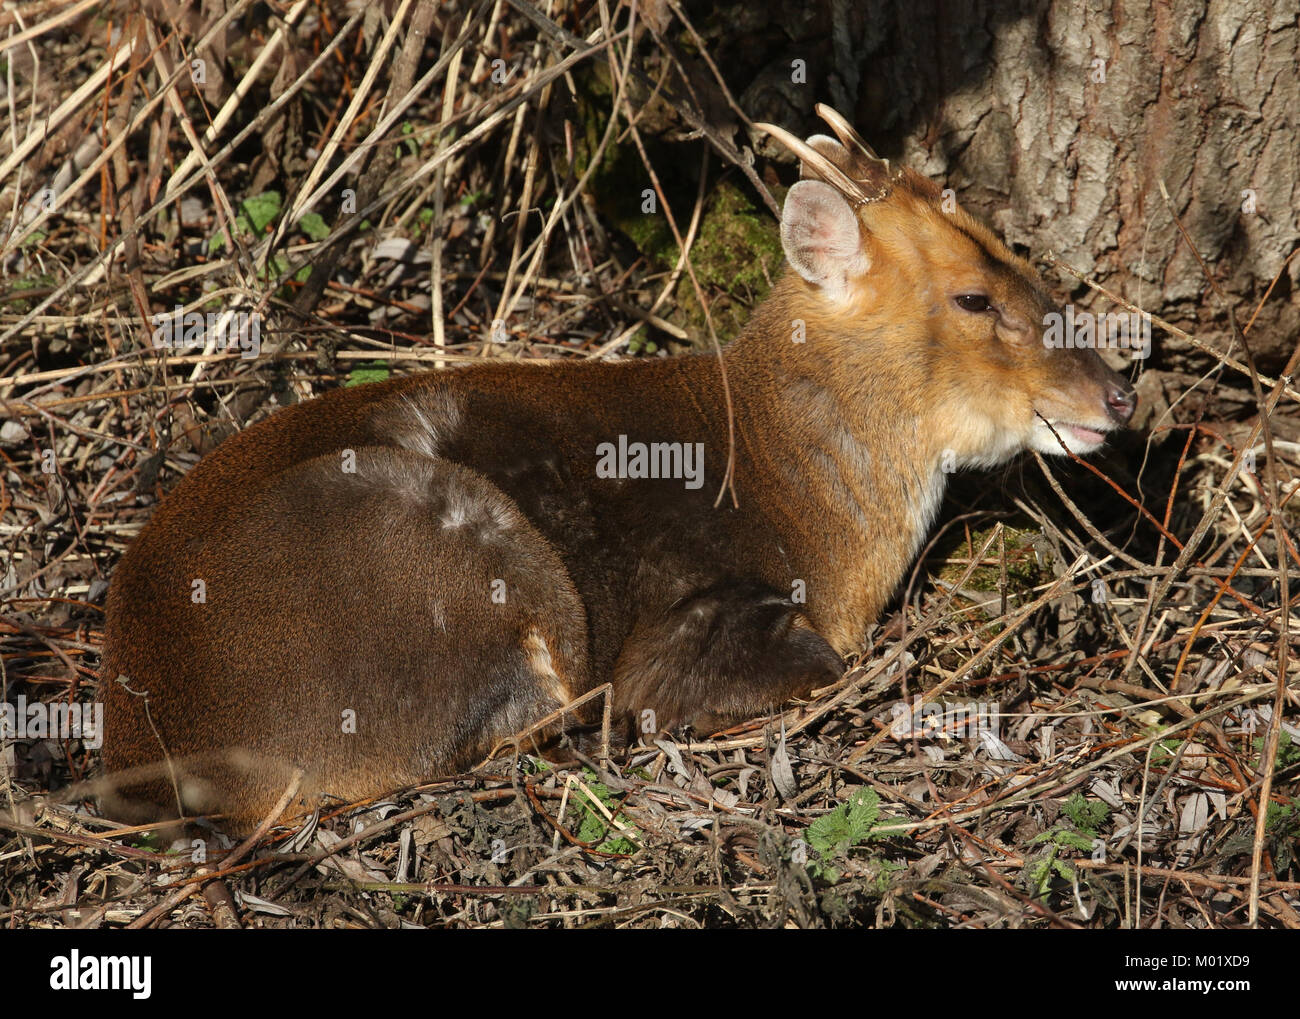 A stunning wild stag Muntjac Deer (Muntiacus reevesi) resting under a tree enjoying the winter sun. Stock Photo